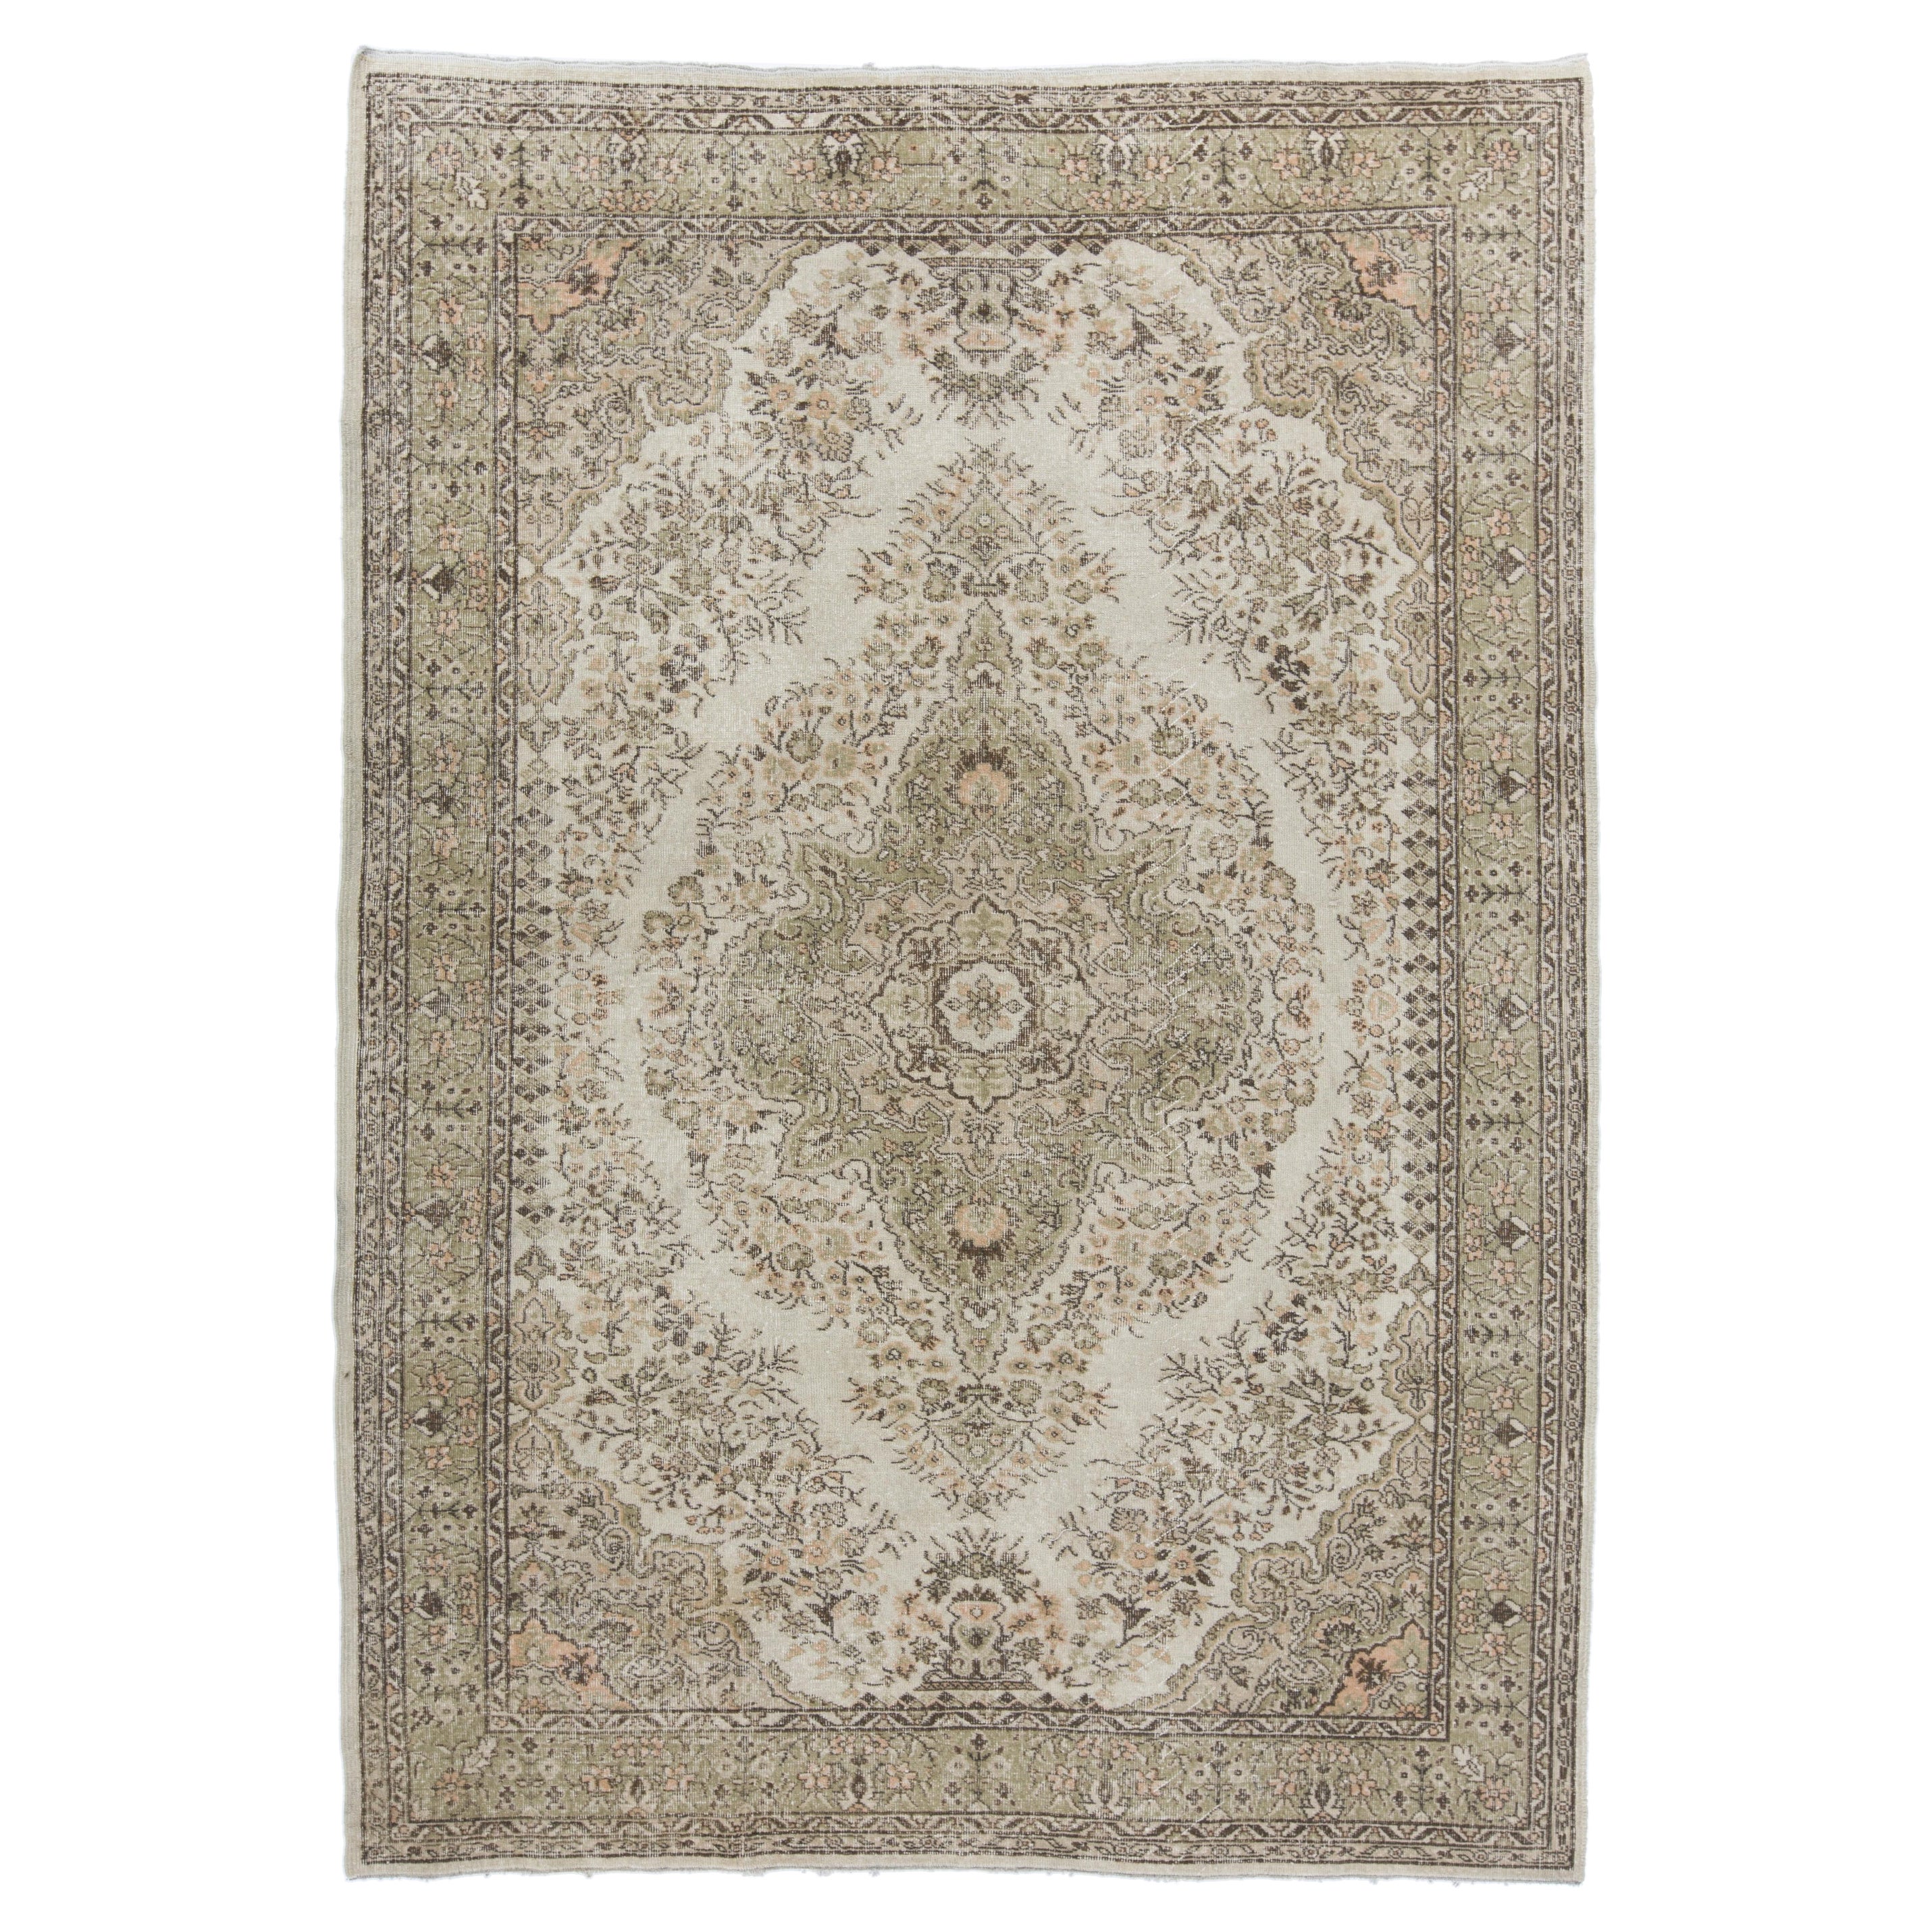 7.4x10.6 Ft Hand-Knotted Anatolian Rug in Neutral Colors, Vintage Oushak Carpet